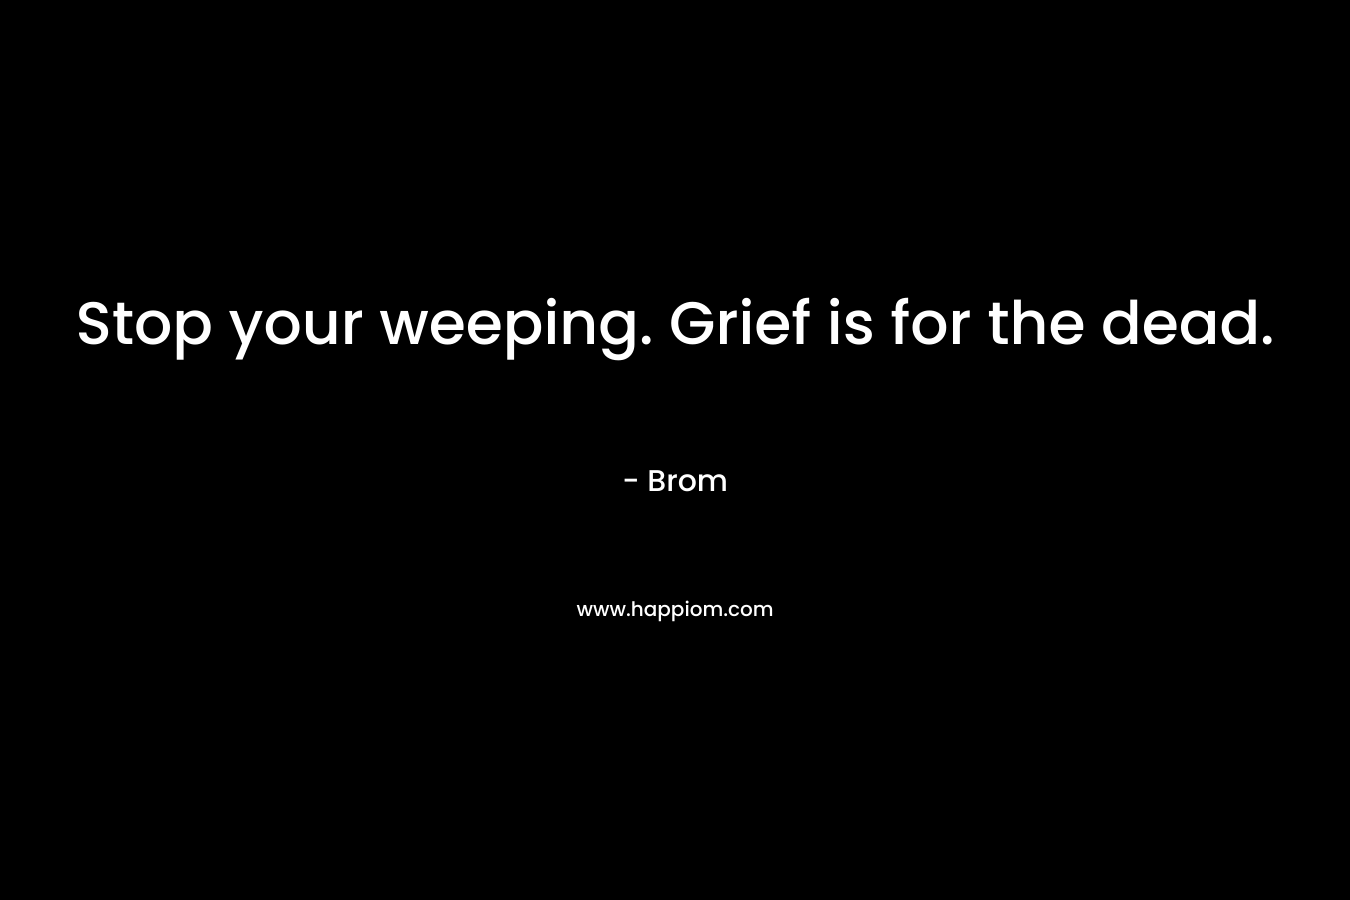 Stop your weeping. Grief is for the dead.